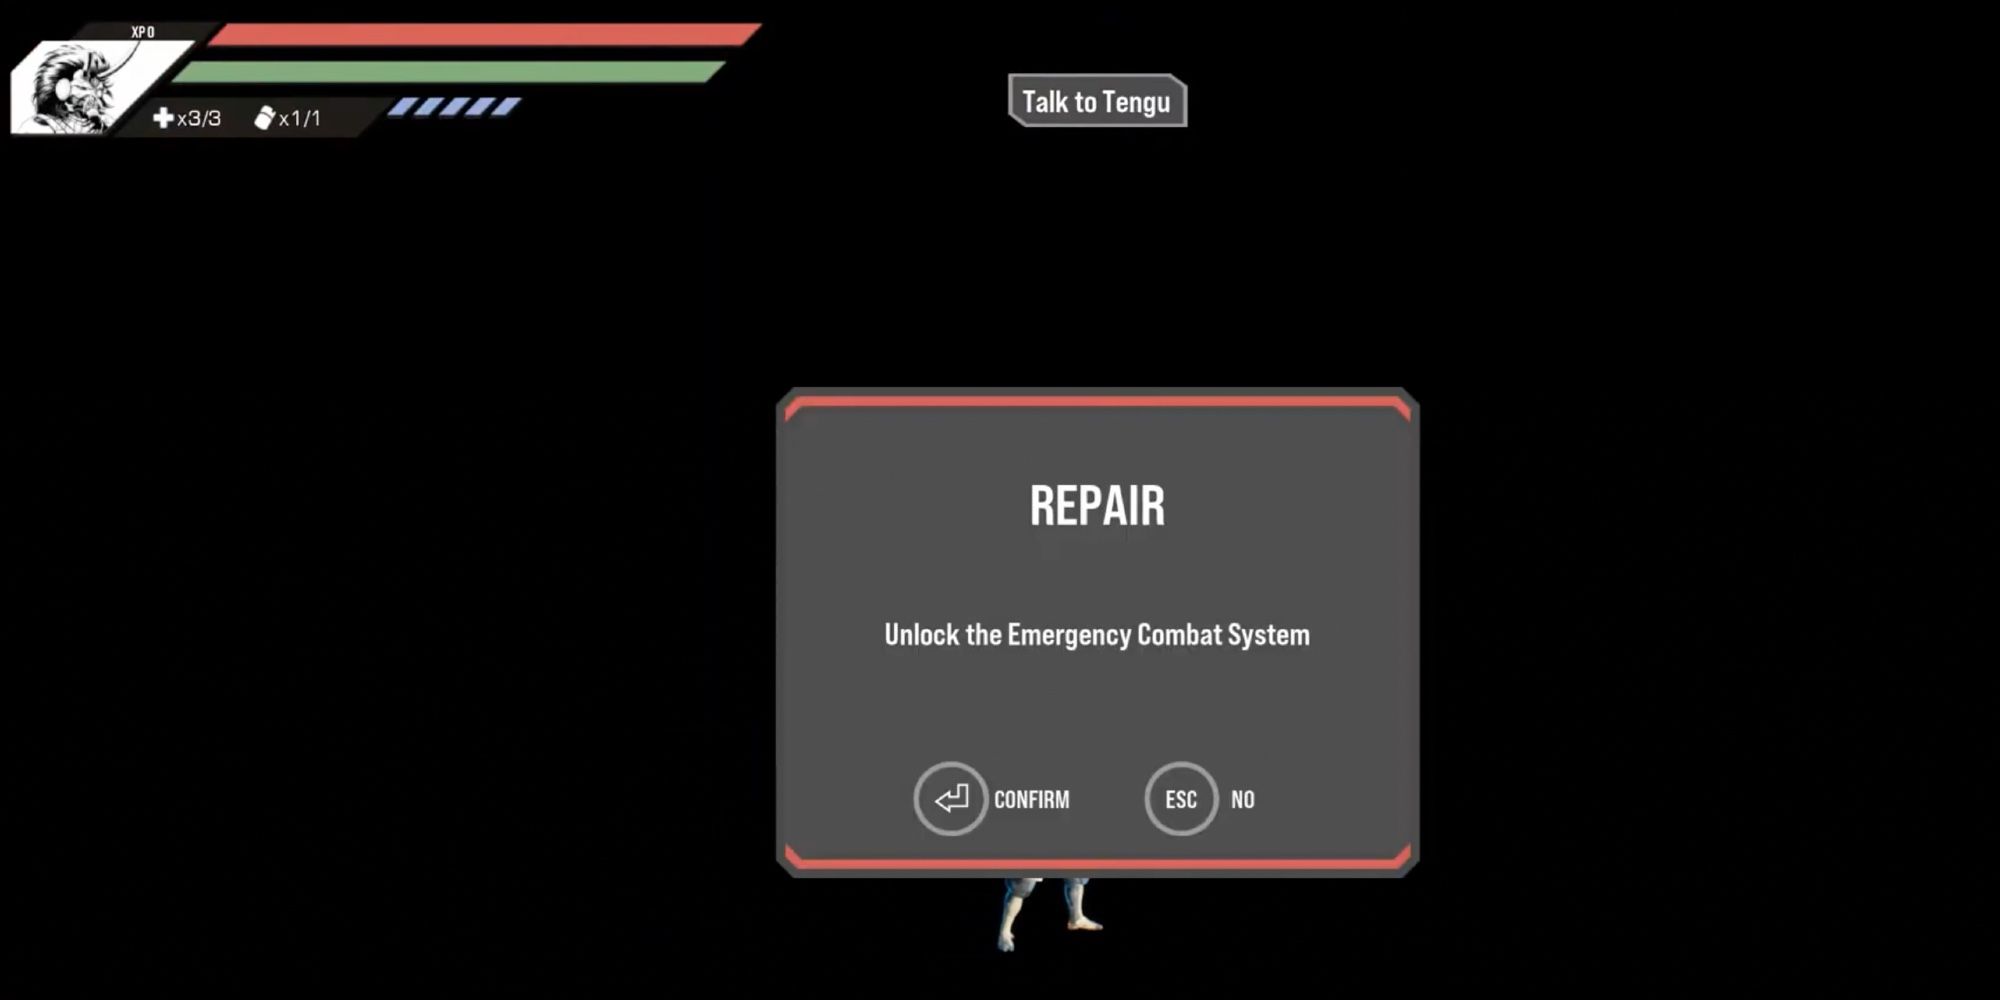 The player repairs their emergency combat system after talking to the Tengu